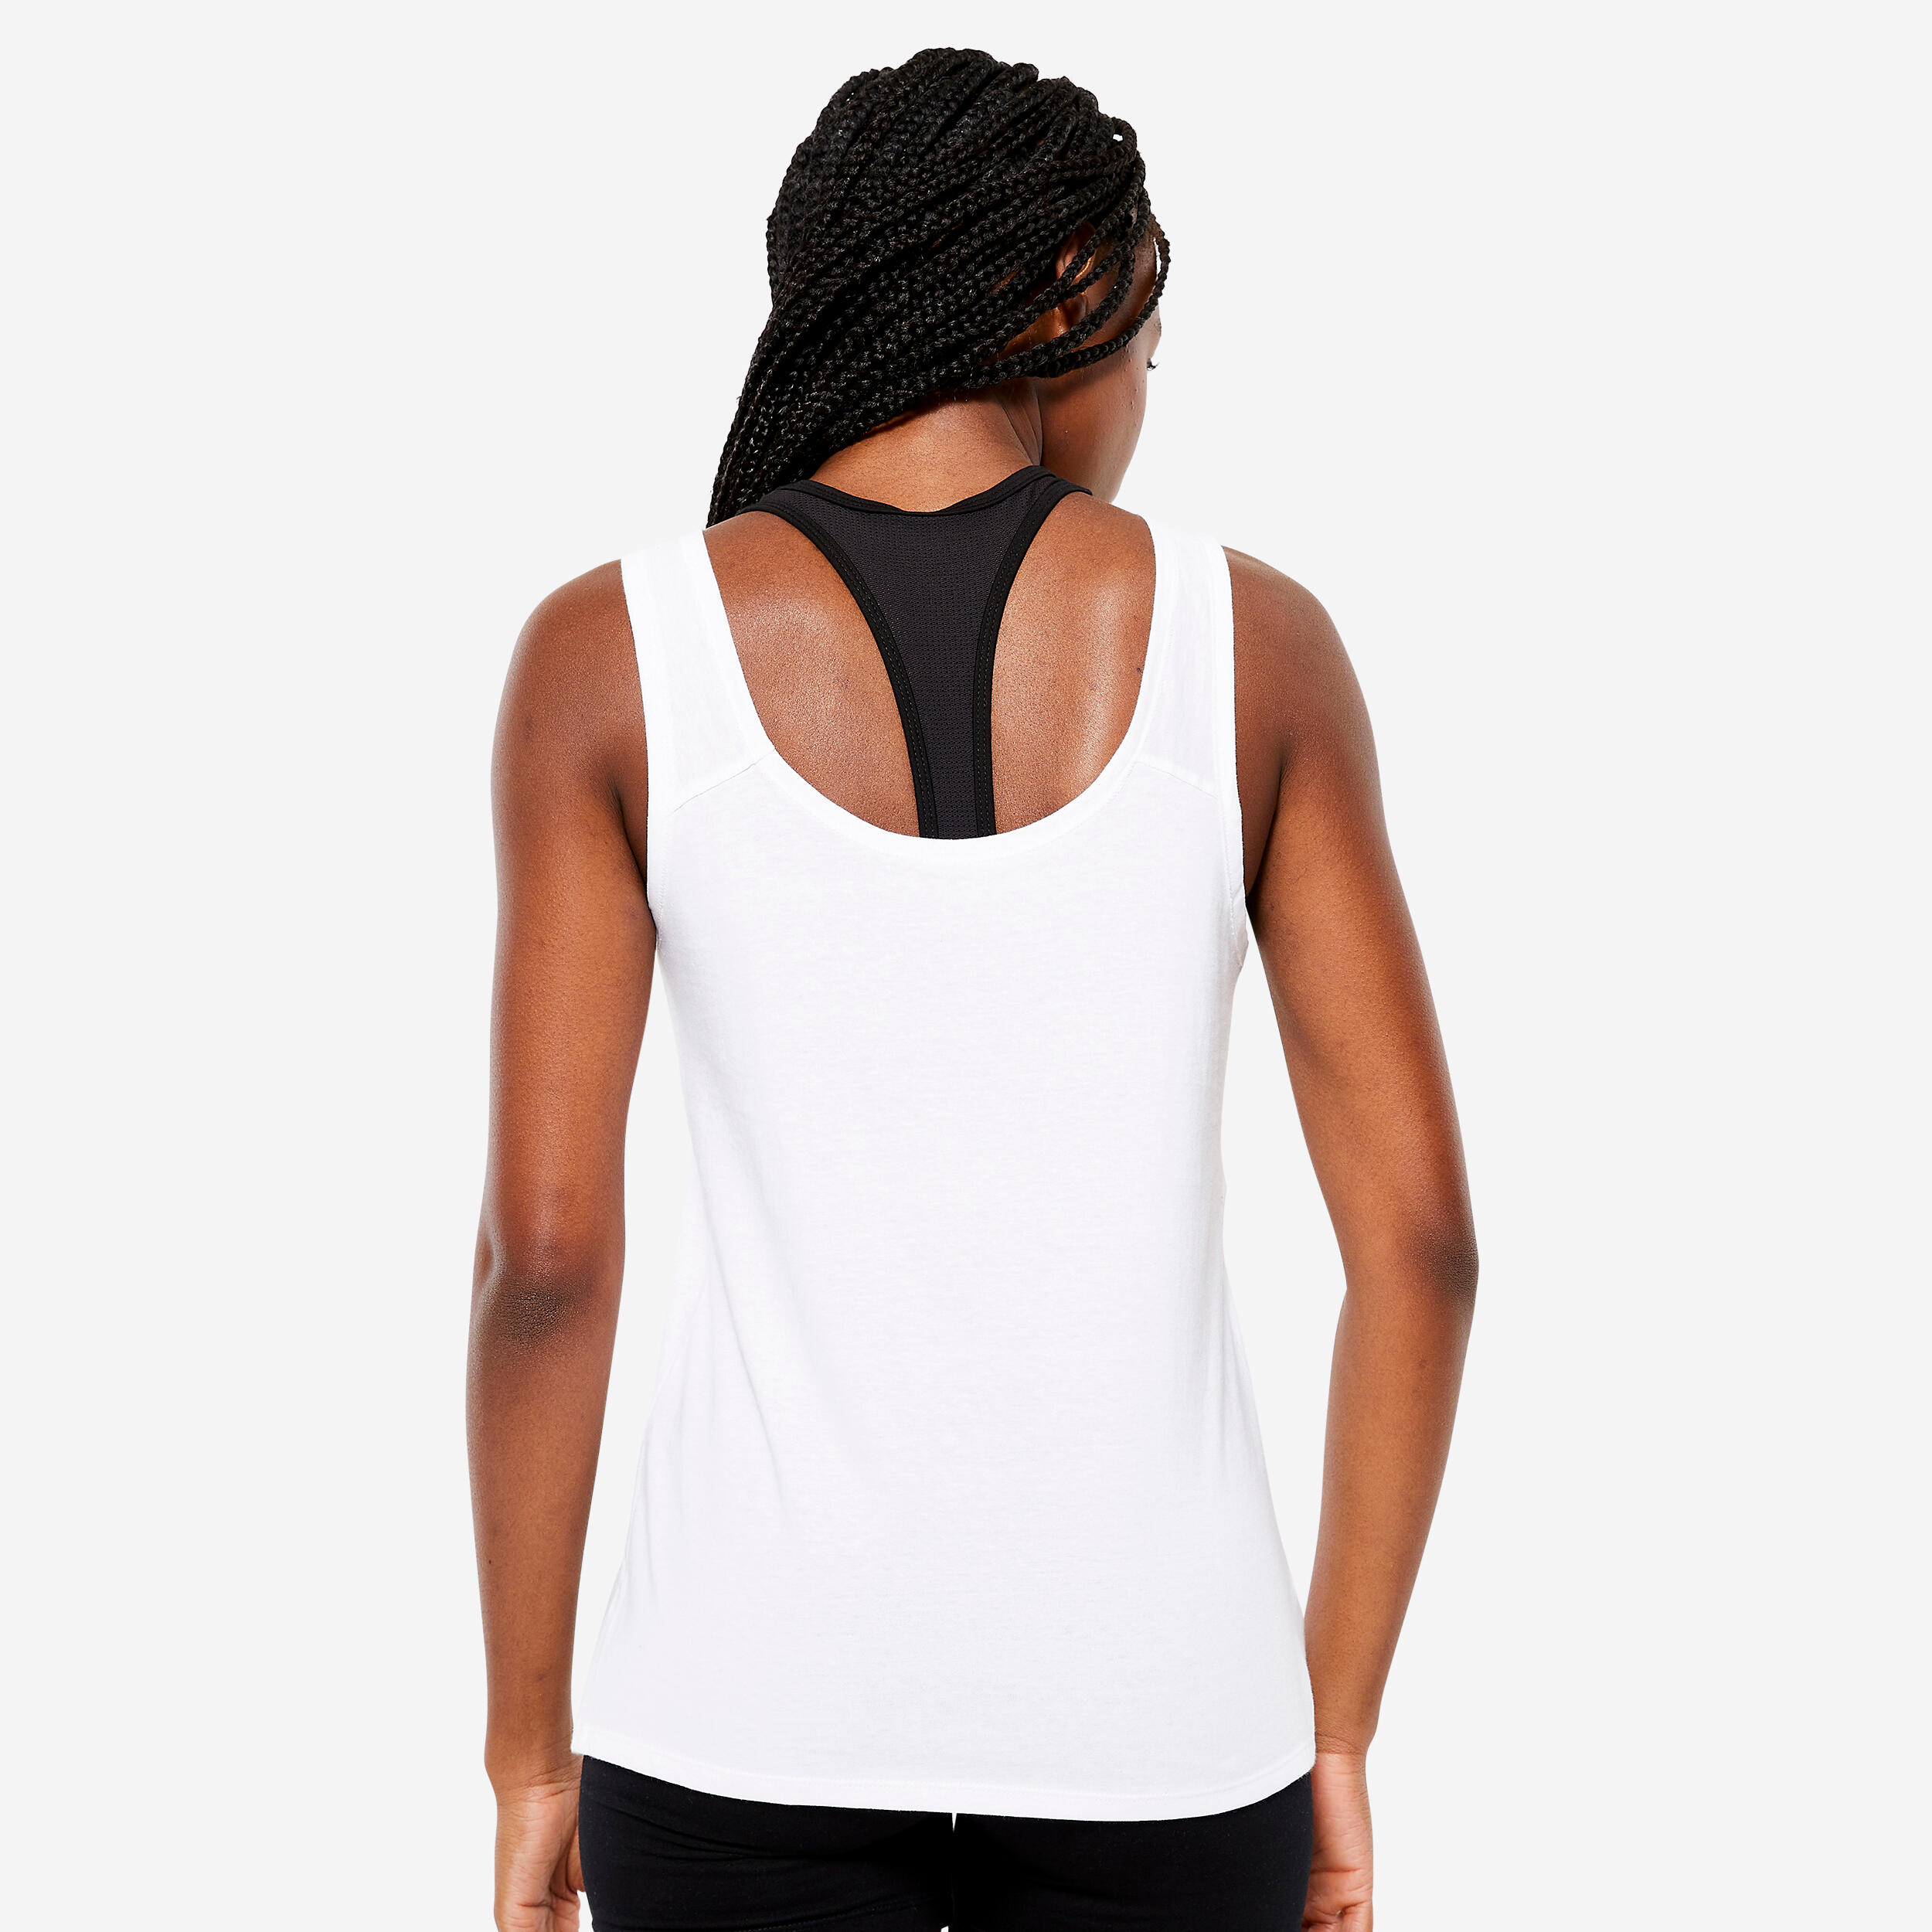 Athl Dpt Women's cotton sports tank top: for sale at 7.99€ on